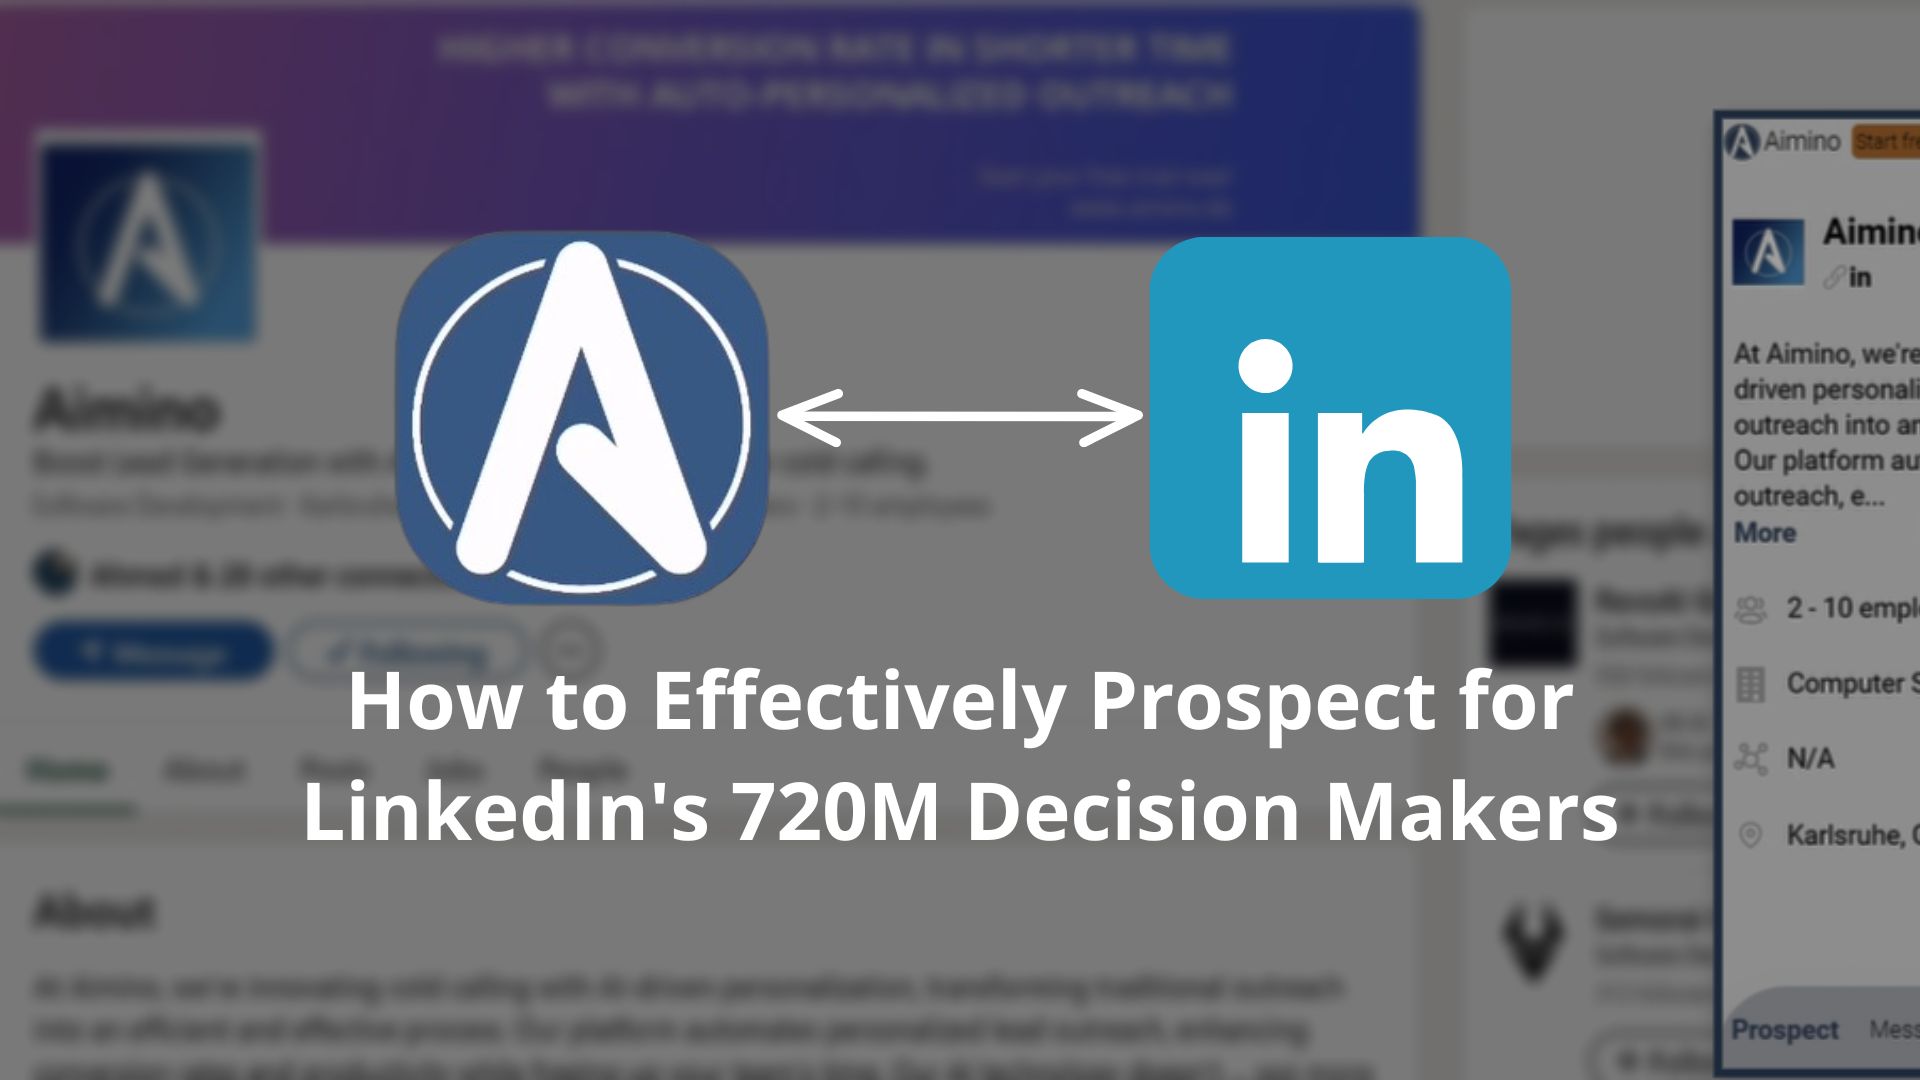 How to Effectively Prospect for LinkedIn’s 720M Decision Makers